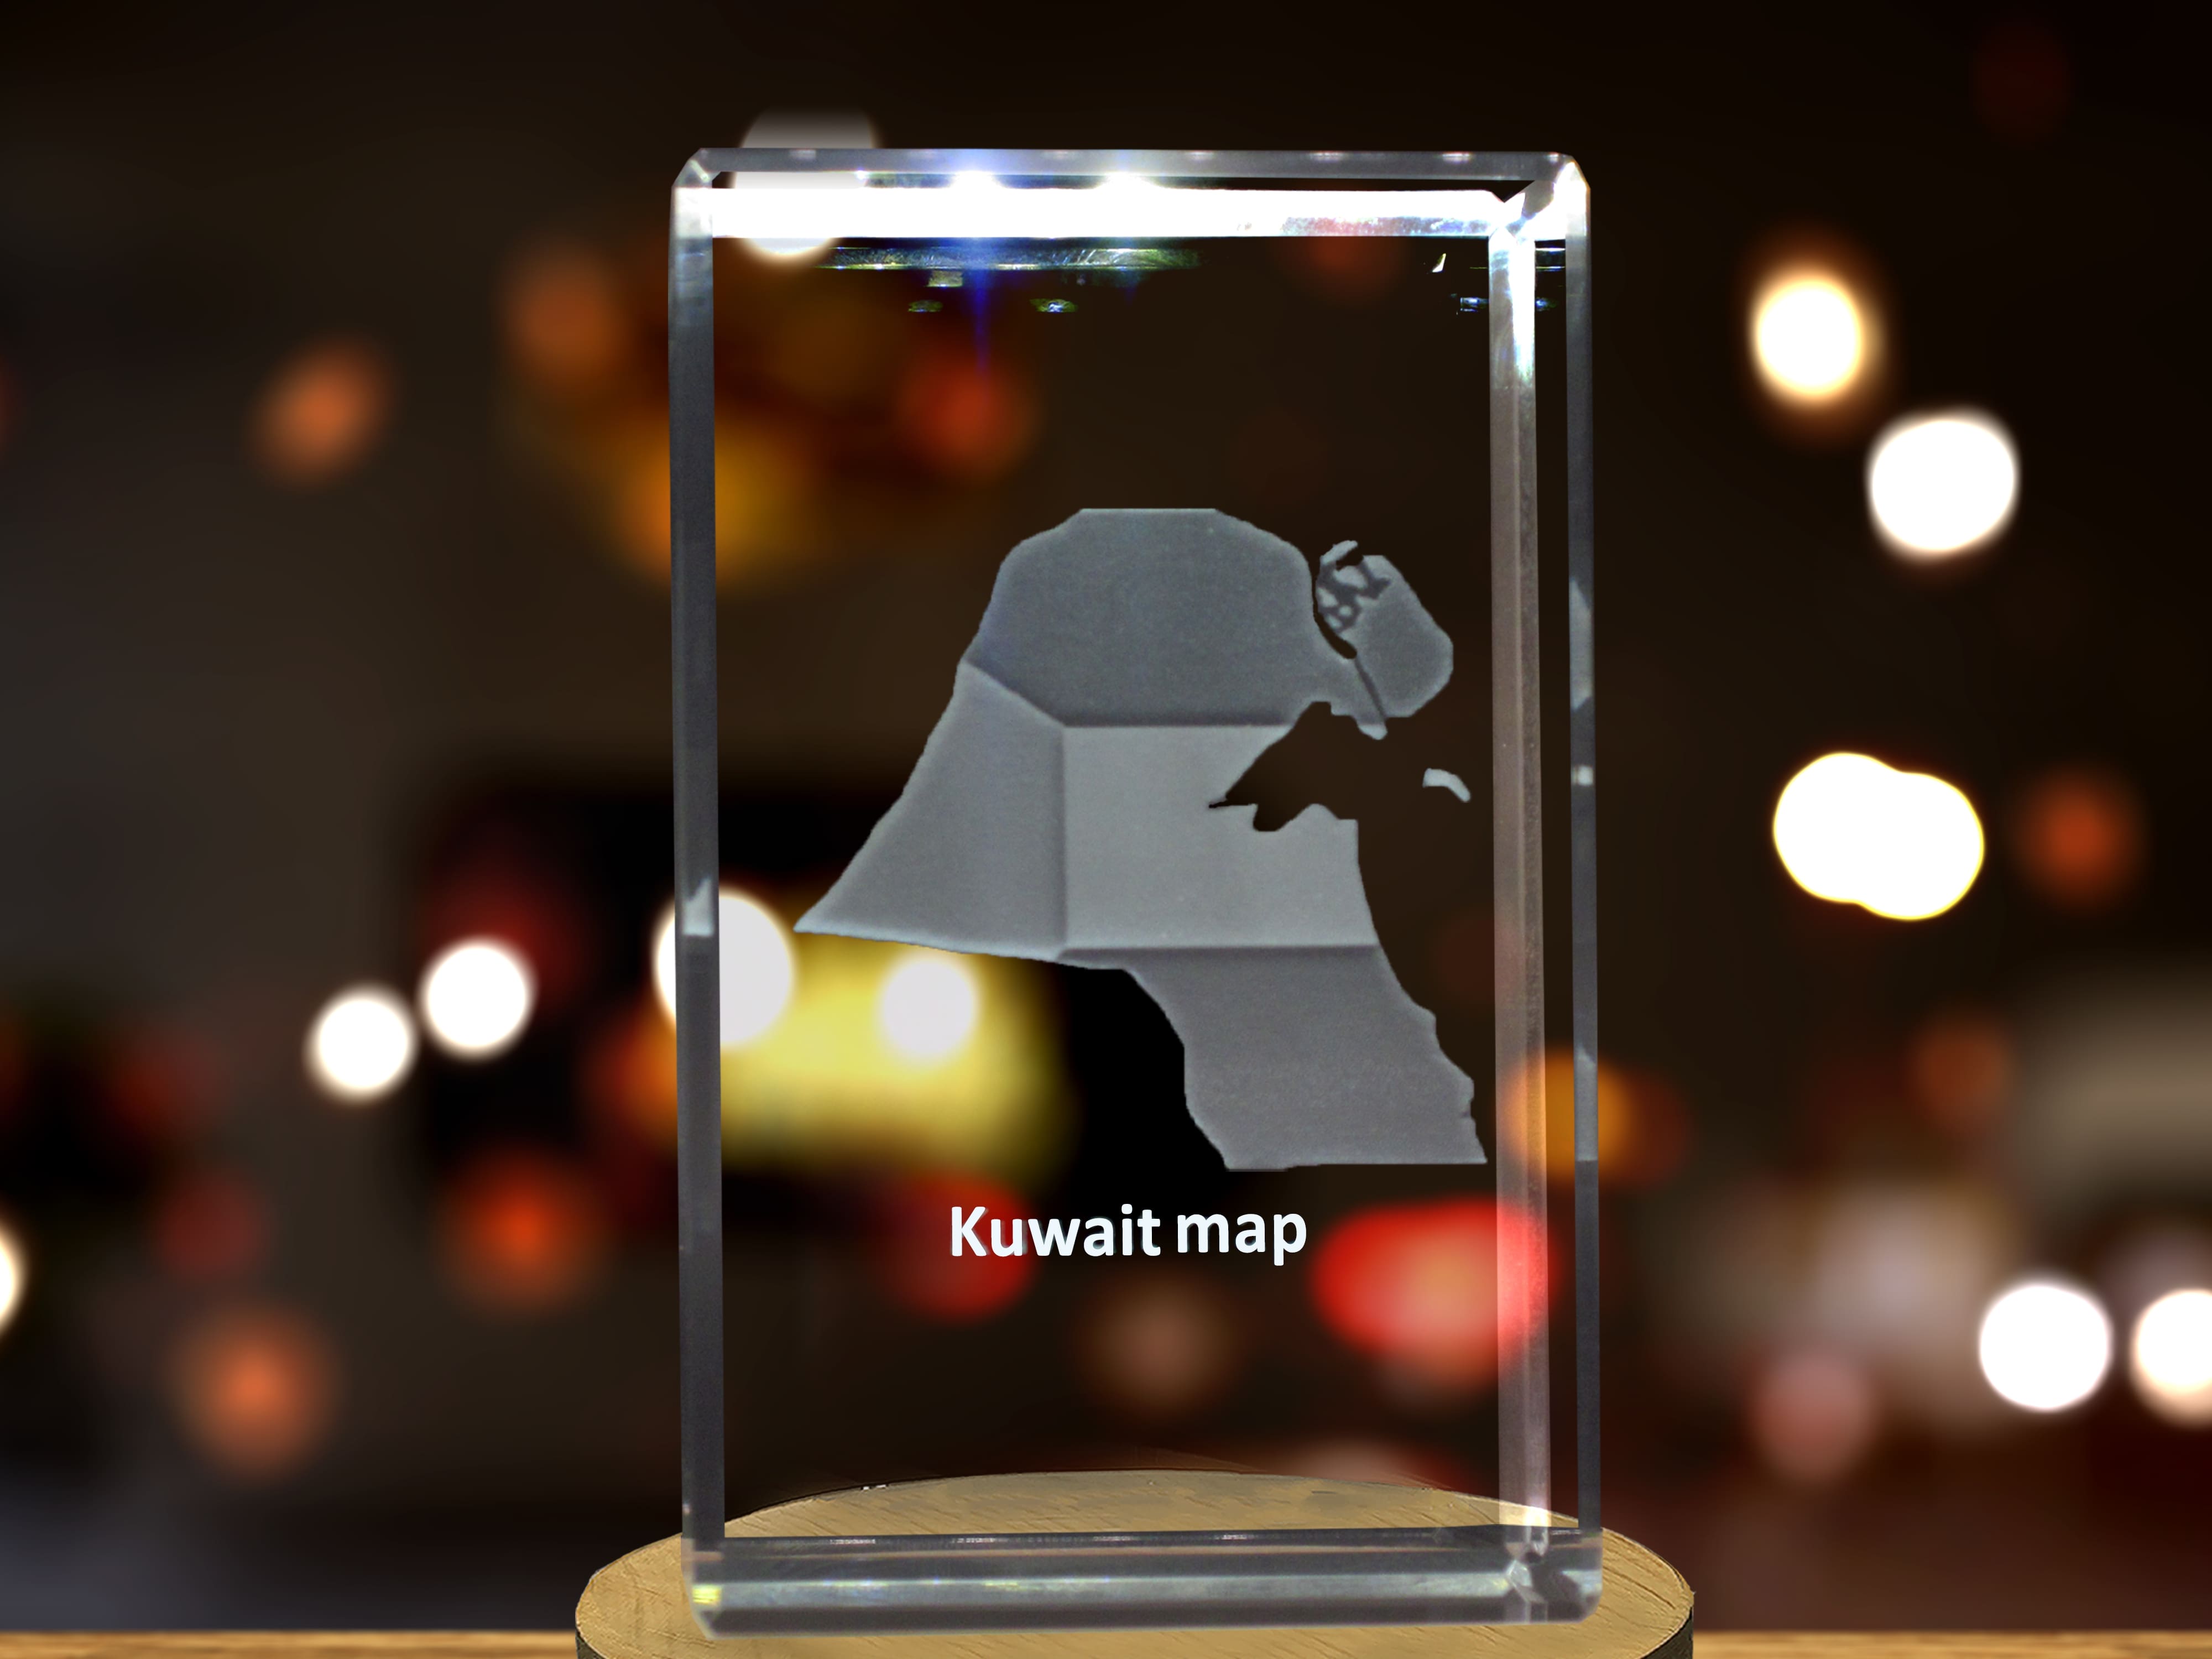 Kuwait 3D Engraved Crystal 3D Engraved Crystal Keepsake/Gift/Decor/Collectible/Souvenir A&B Crystal Collection